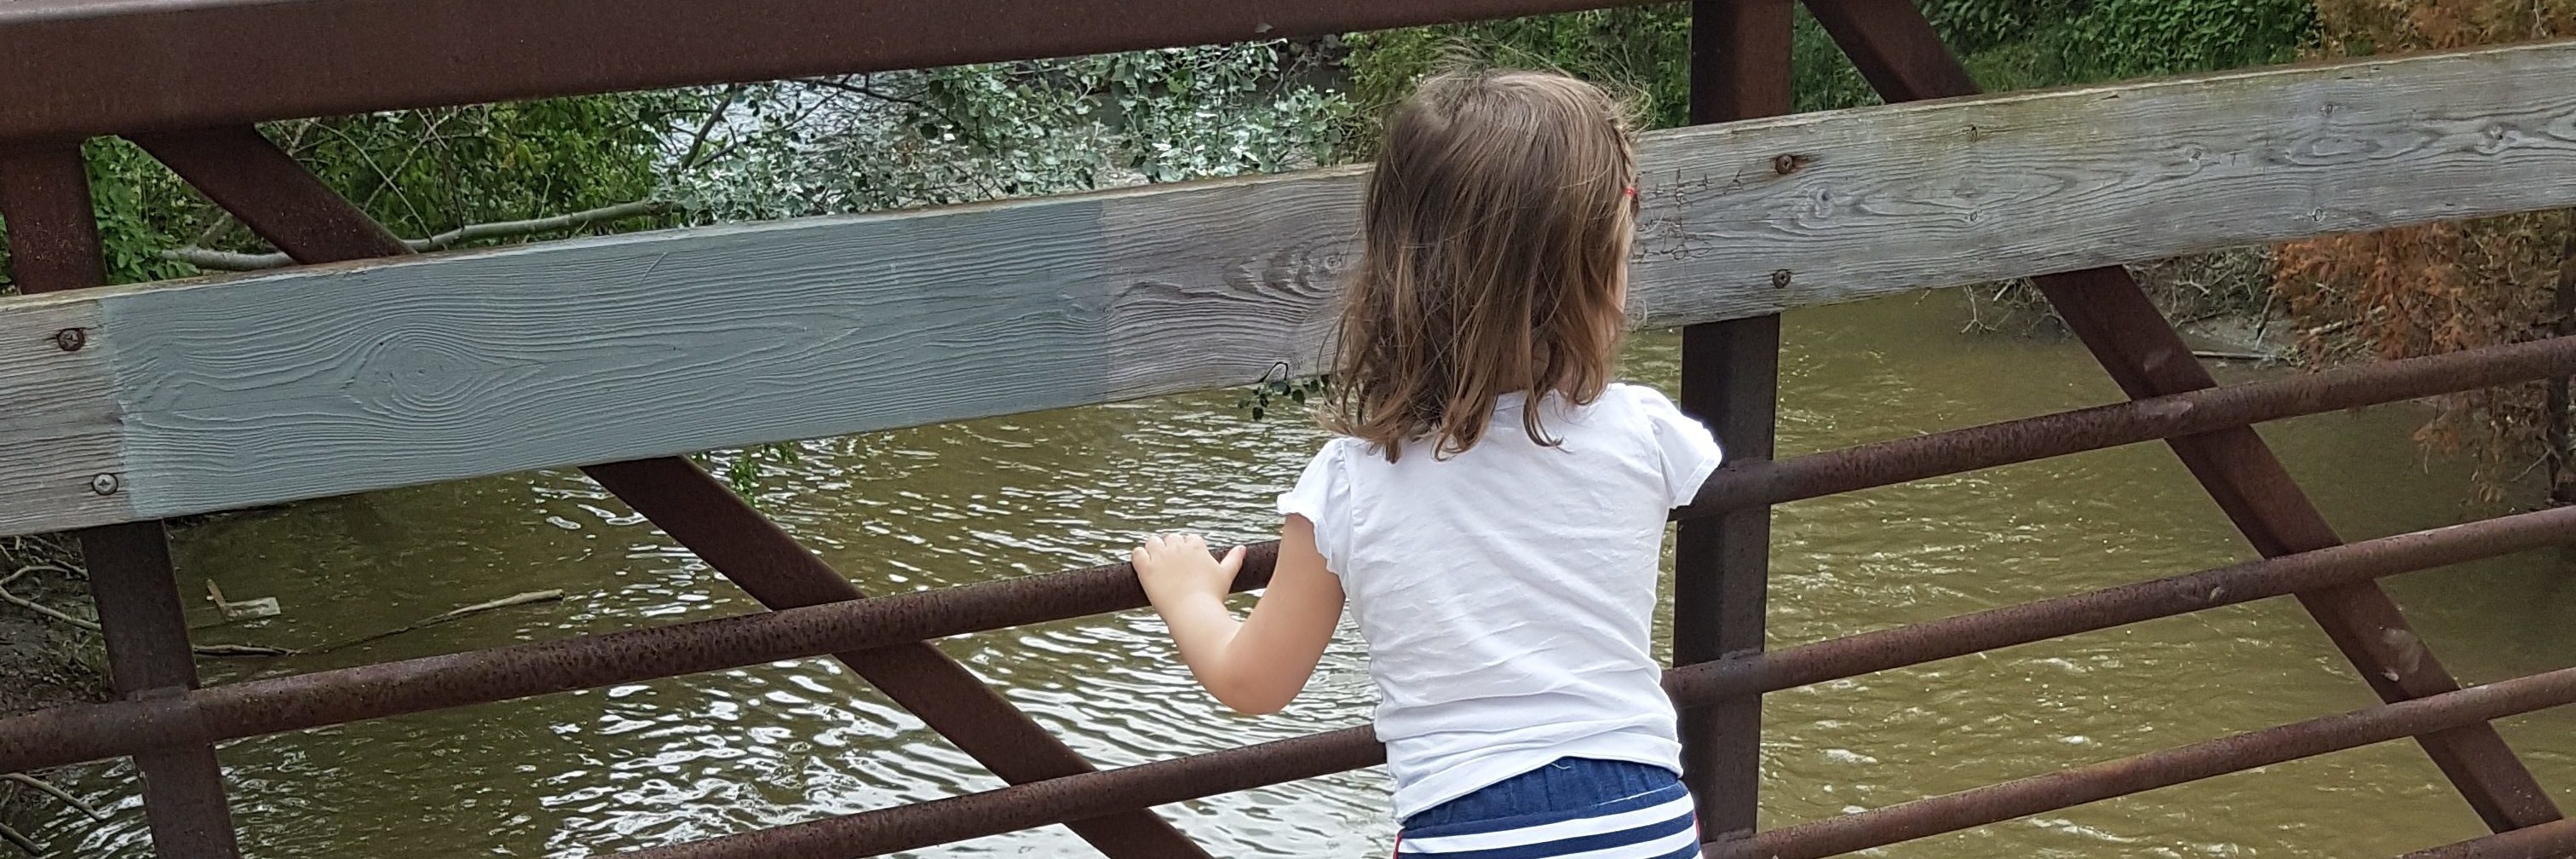 Little girl on a bridge looking at water. We see her back side and her leg braces.